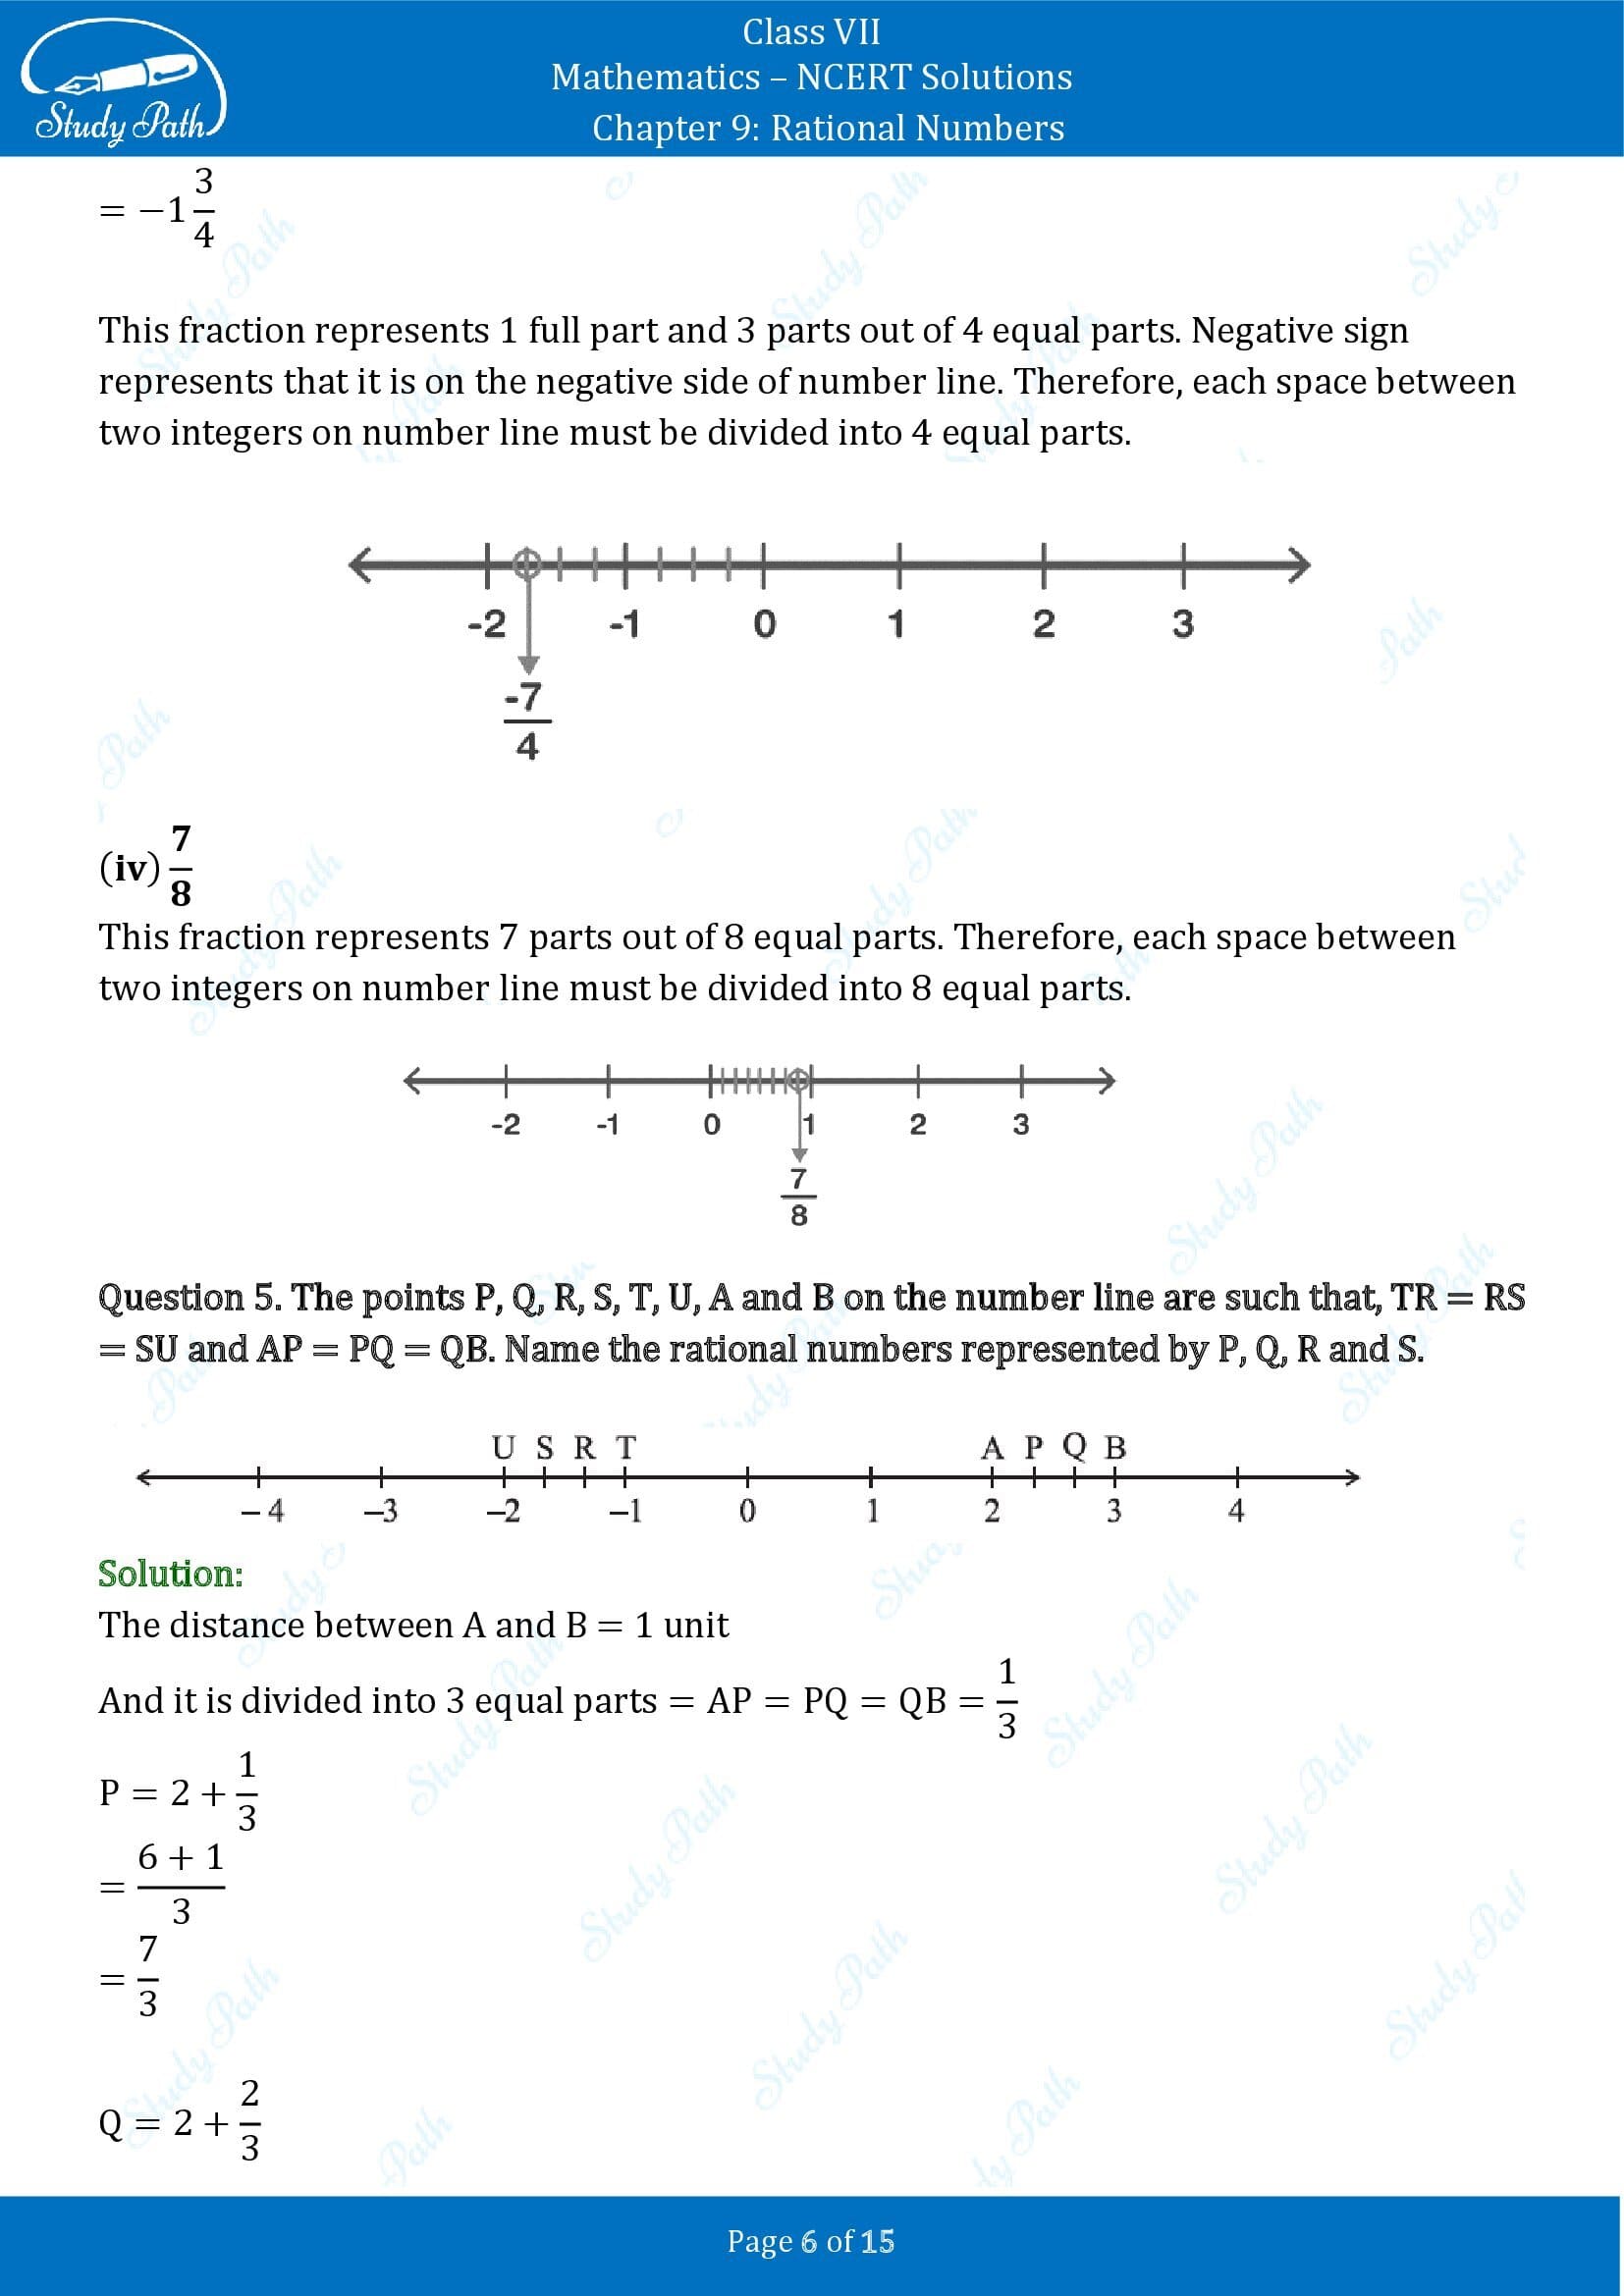 NCERT Solutions for Class 7 Maths Chapter 9 Rational Numbers Exercise 9.1 00006